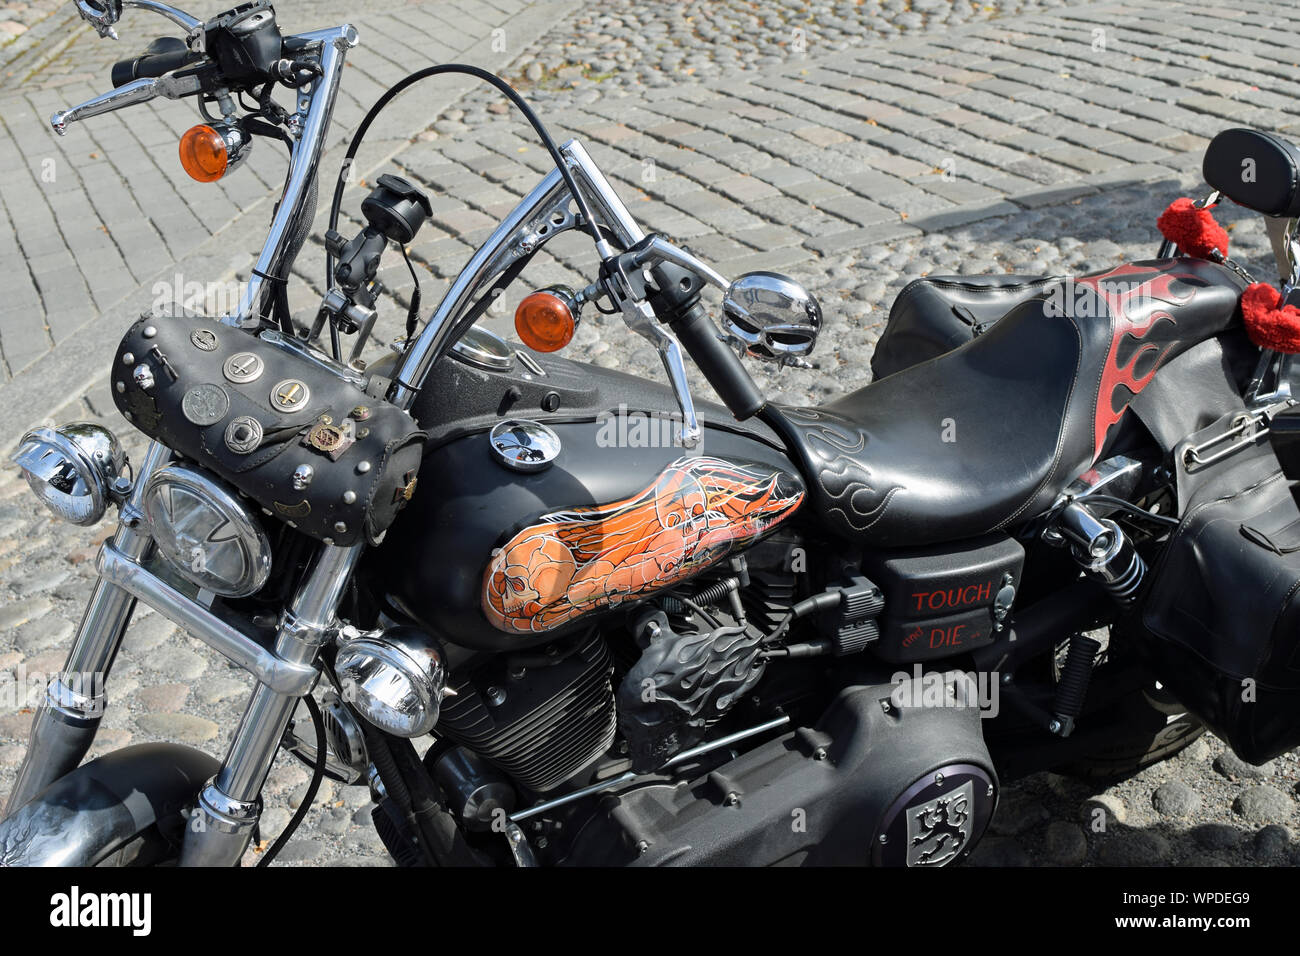 Tampere, Finland - August 31, 2019: Customized motorcycle at the bike show Mansen Mäntä Messut (Tampere piston fair in English) with skull theme. Stock Photo